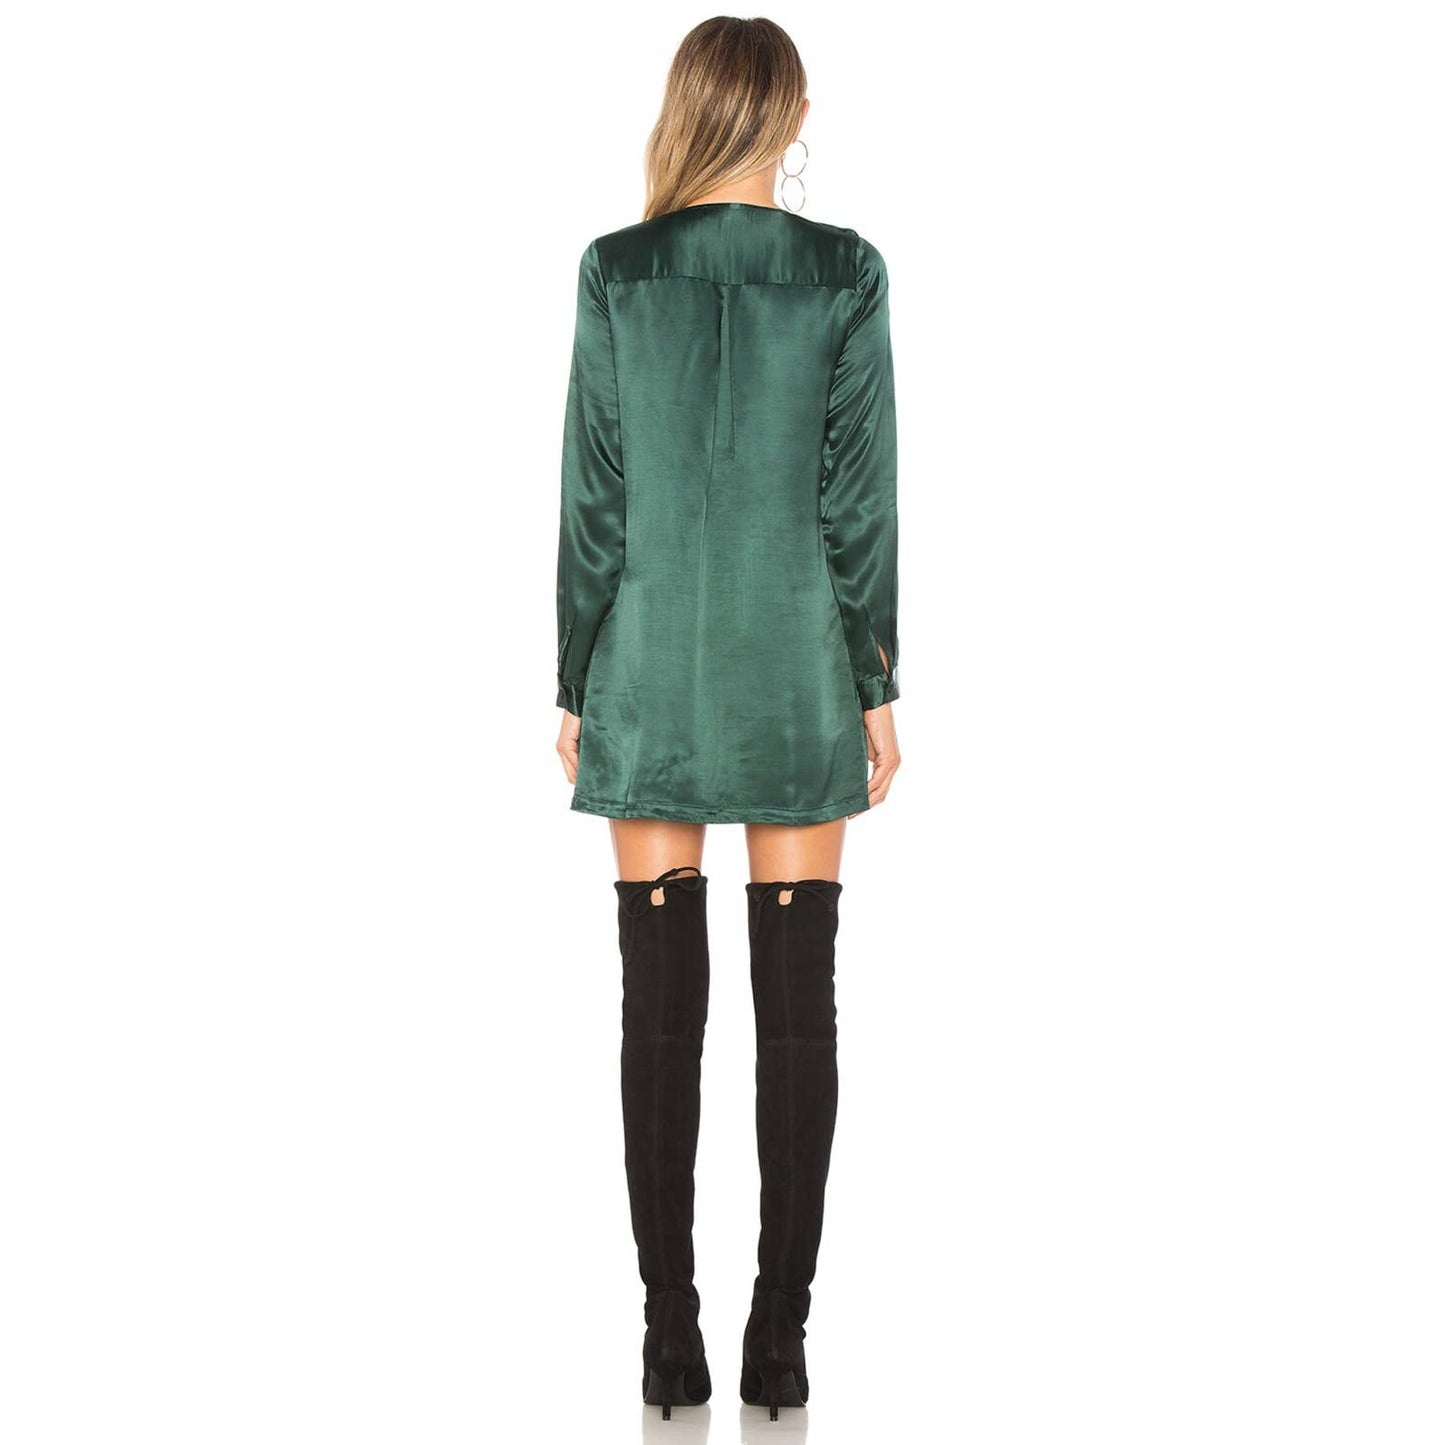 L'Academie The Cadet Dress in Emerald NWT Size XS